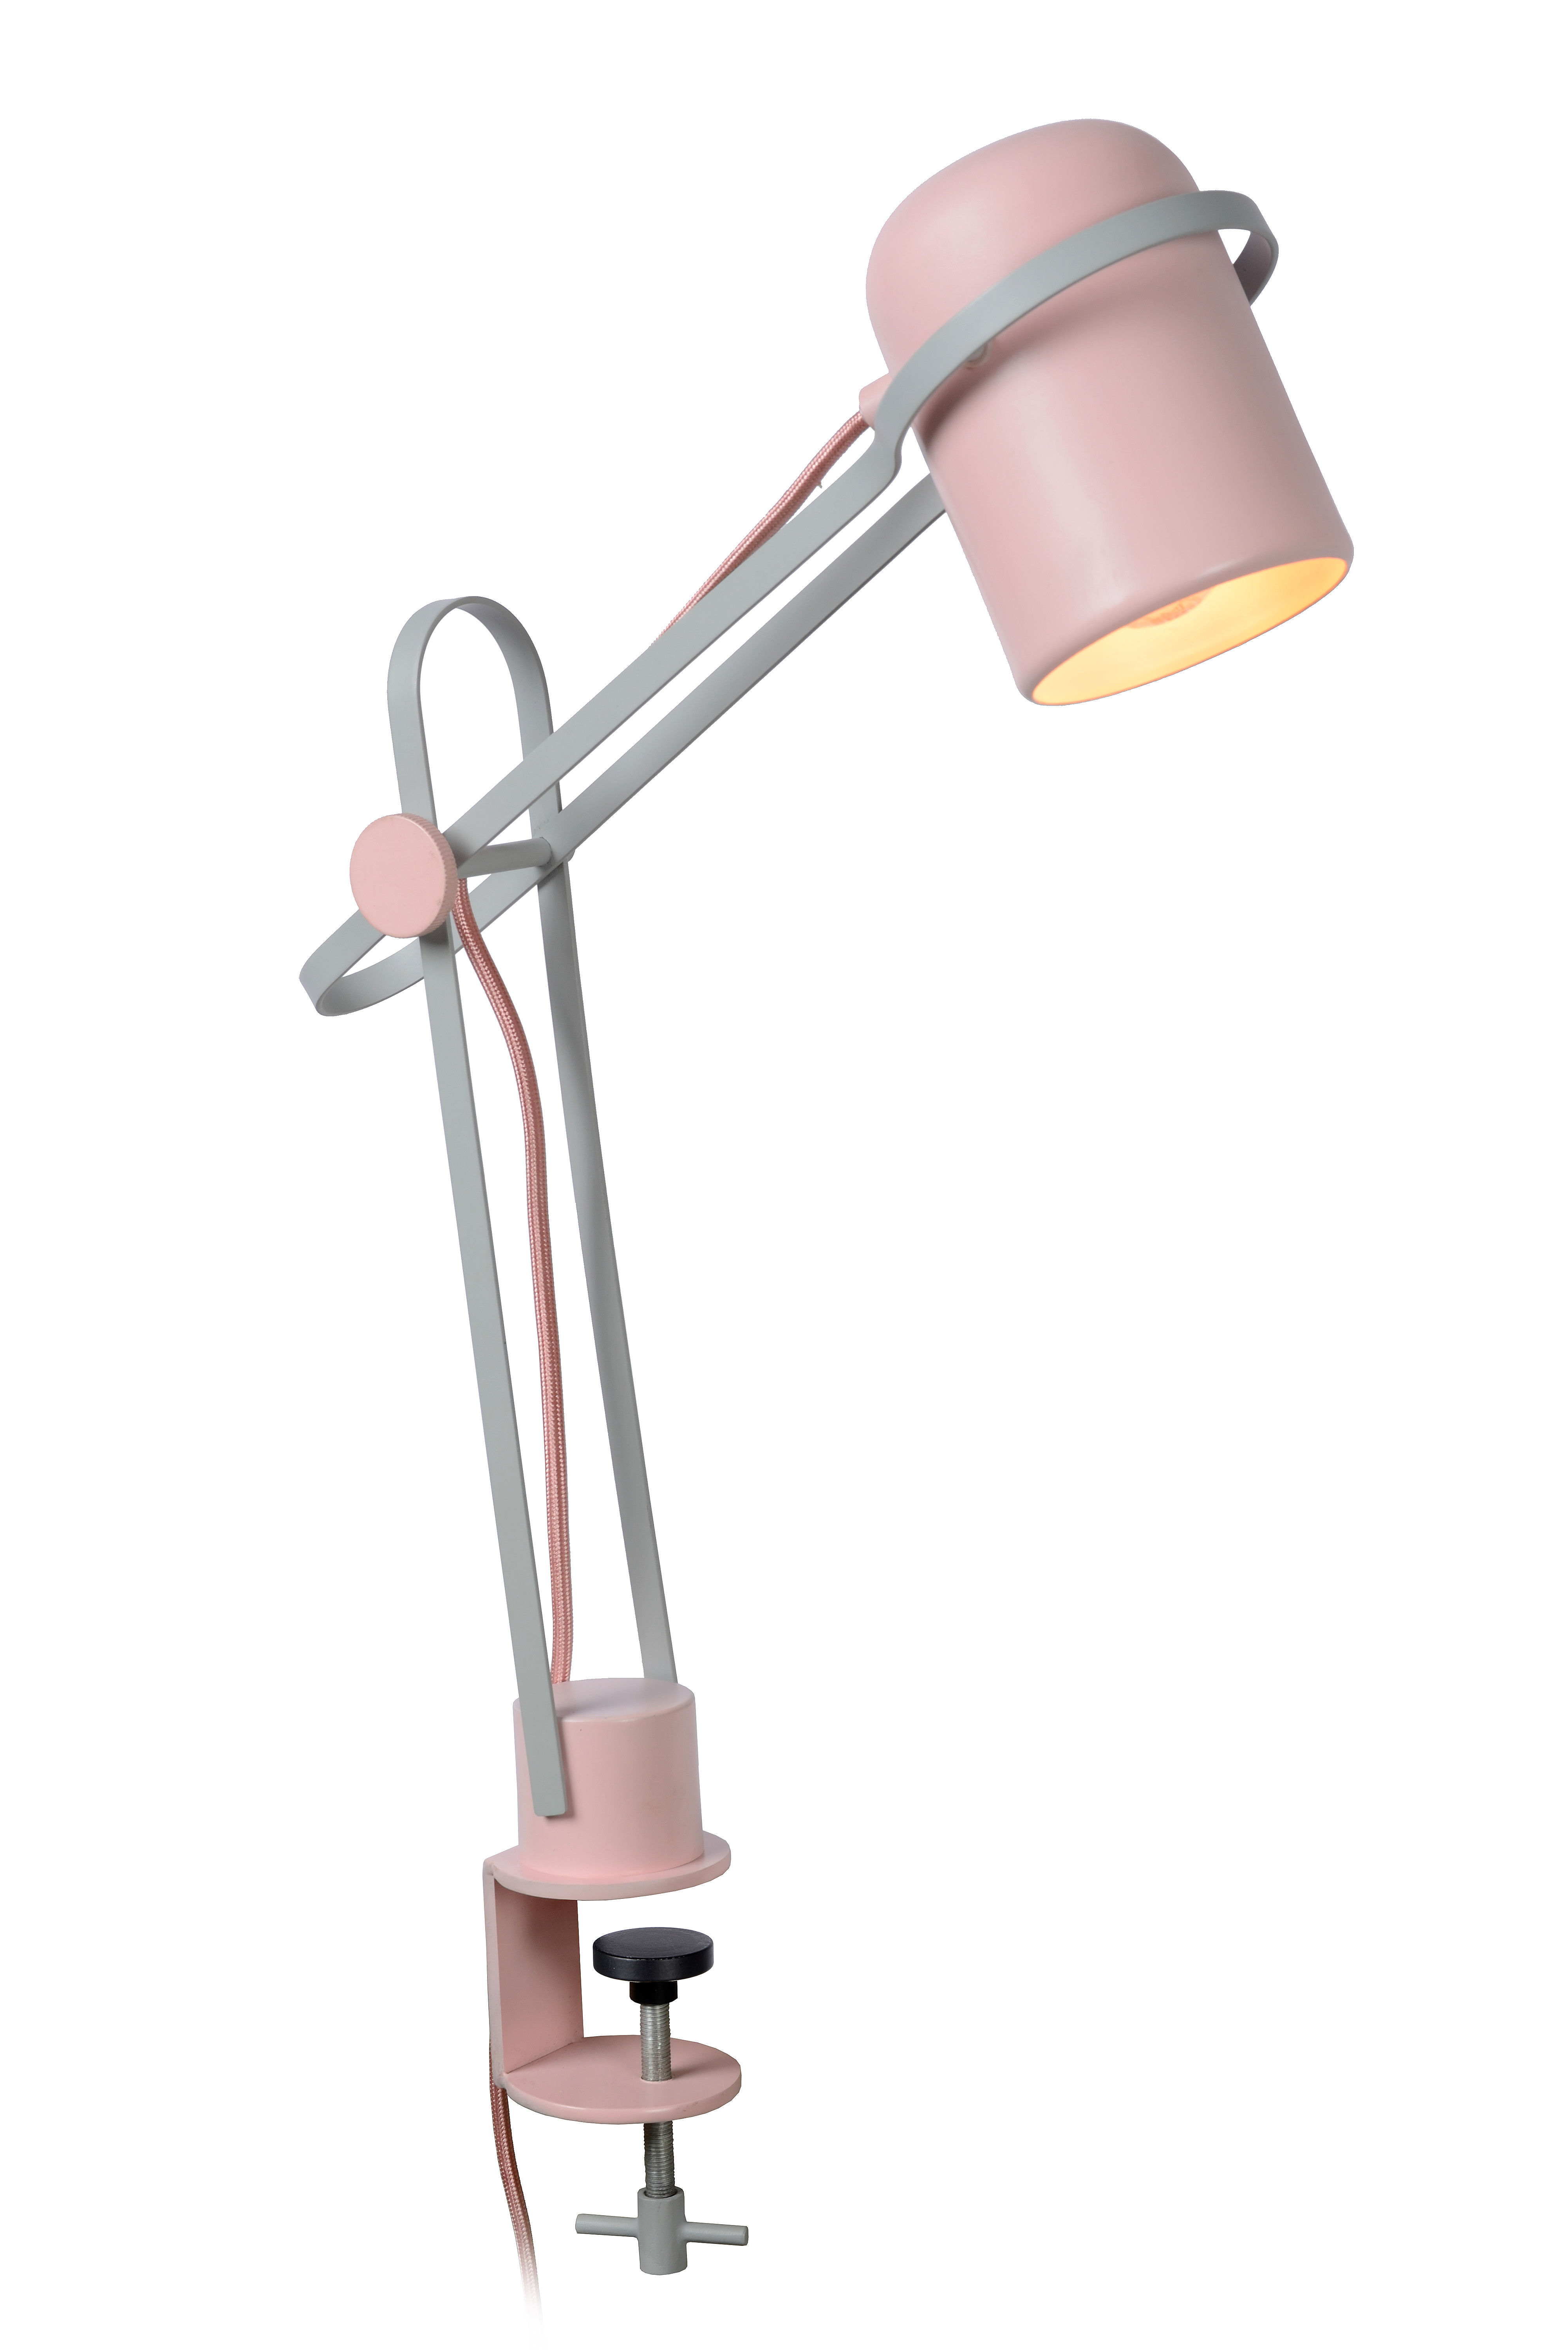 Lucide BASTIN - Clamp lamps Children - 1xE14 - Pink